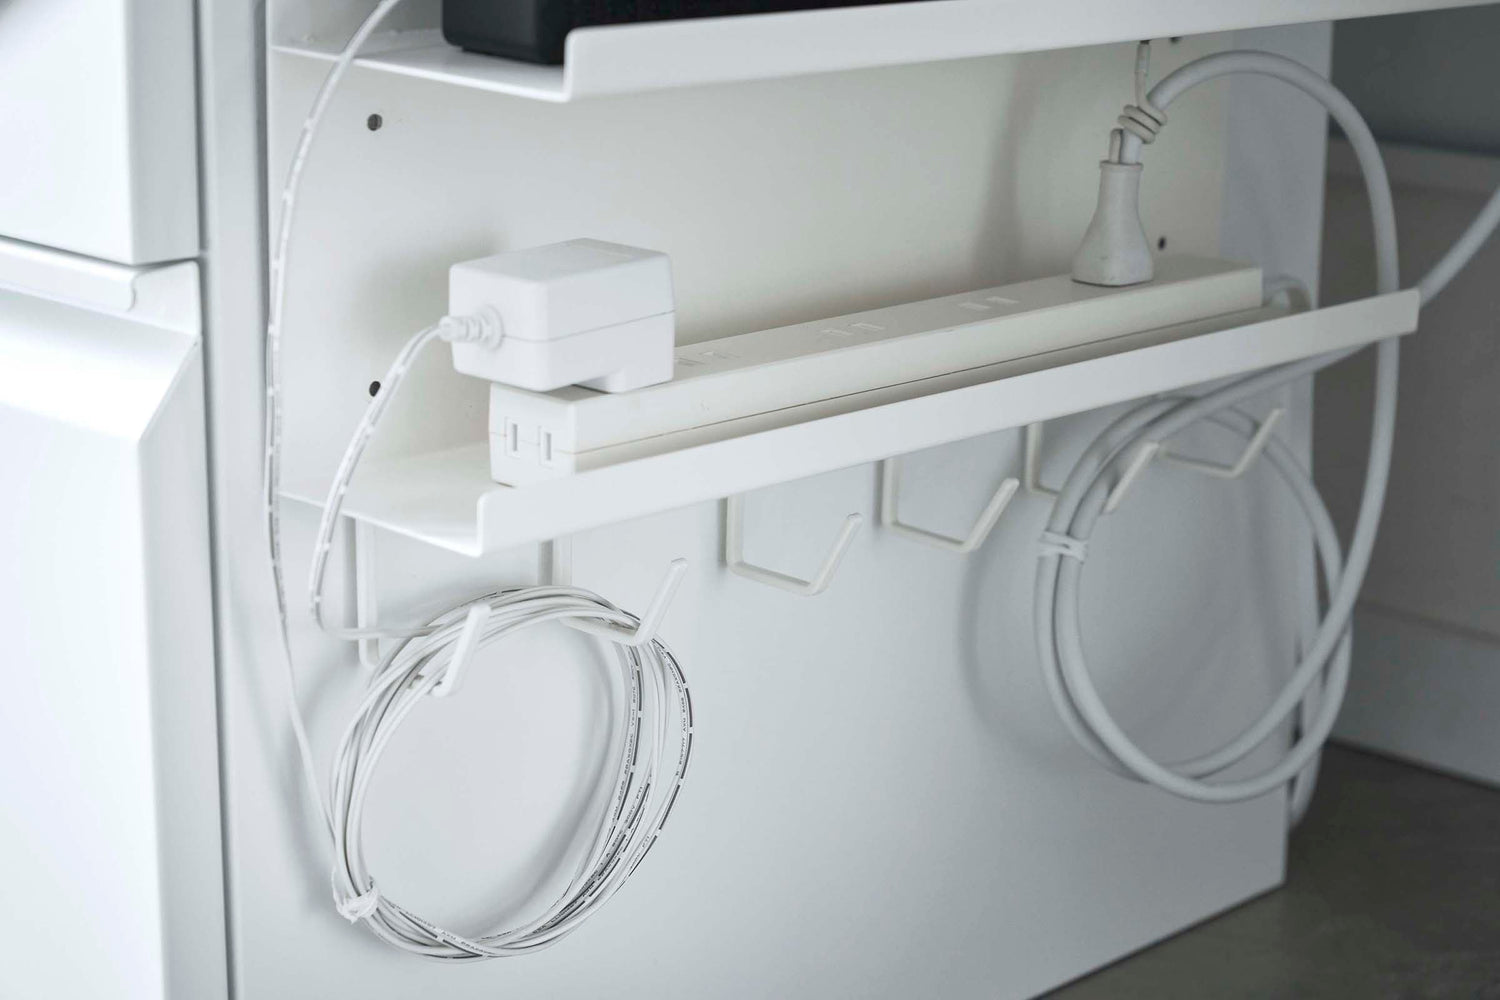 7 Best Wall-Mounted Cable Organizers and Racks